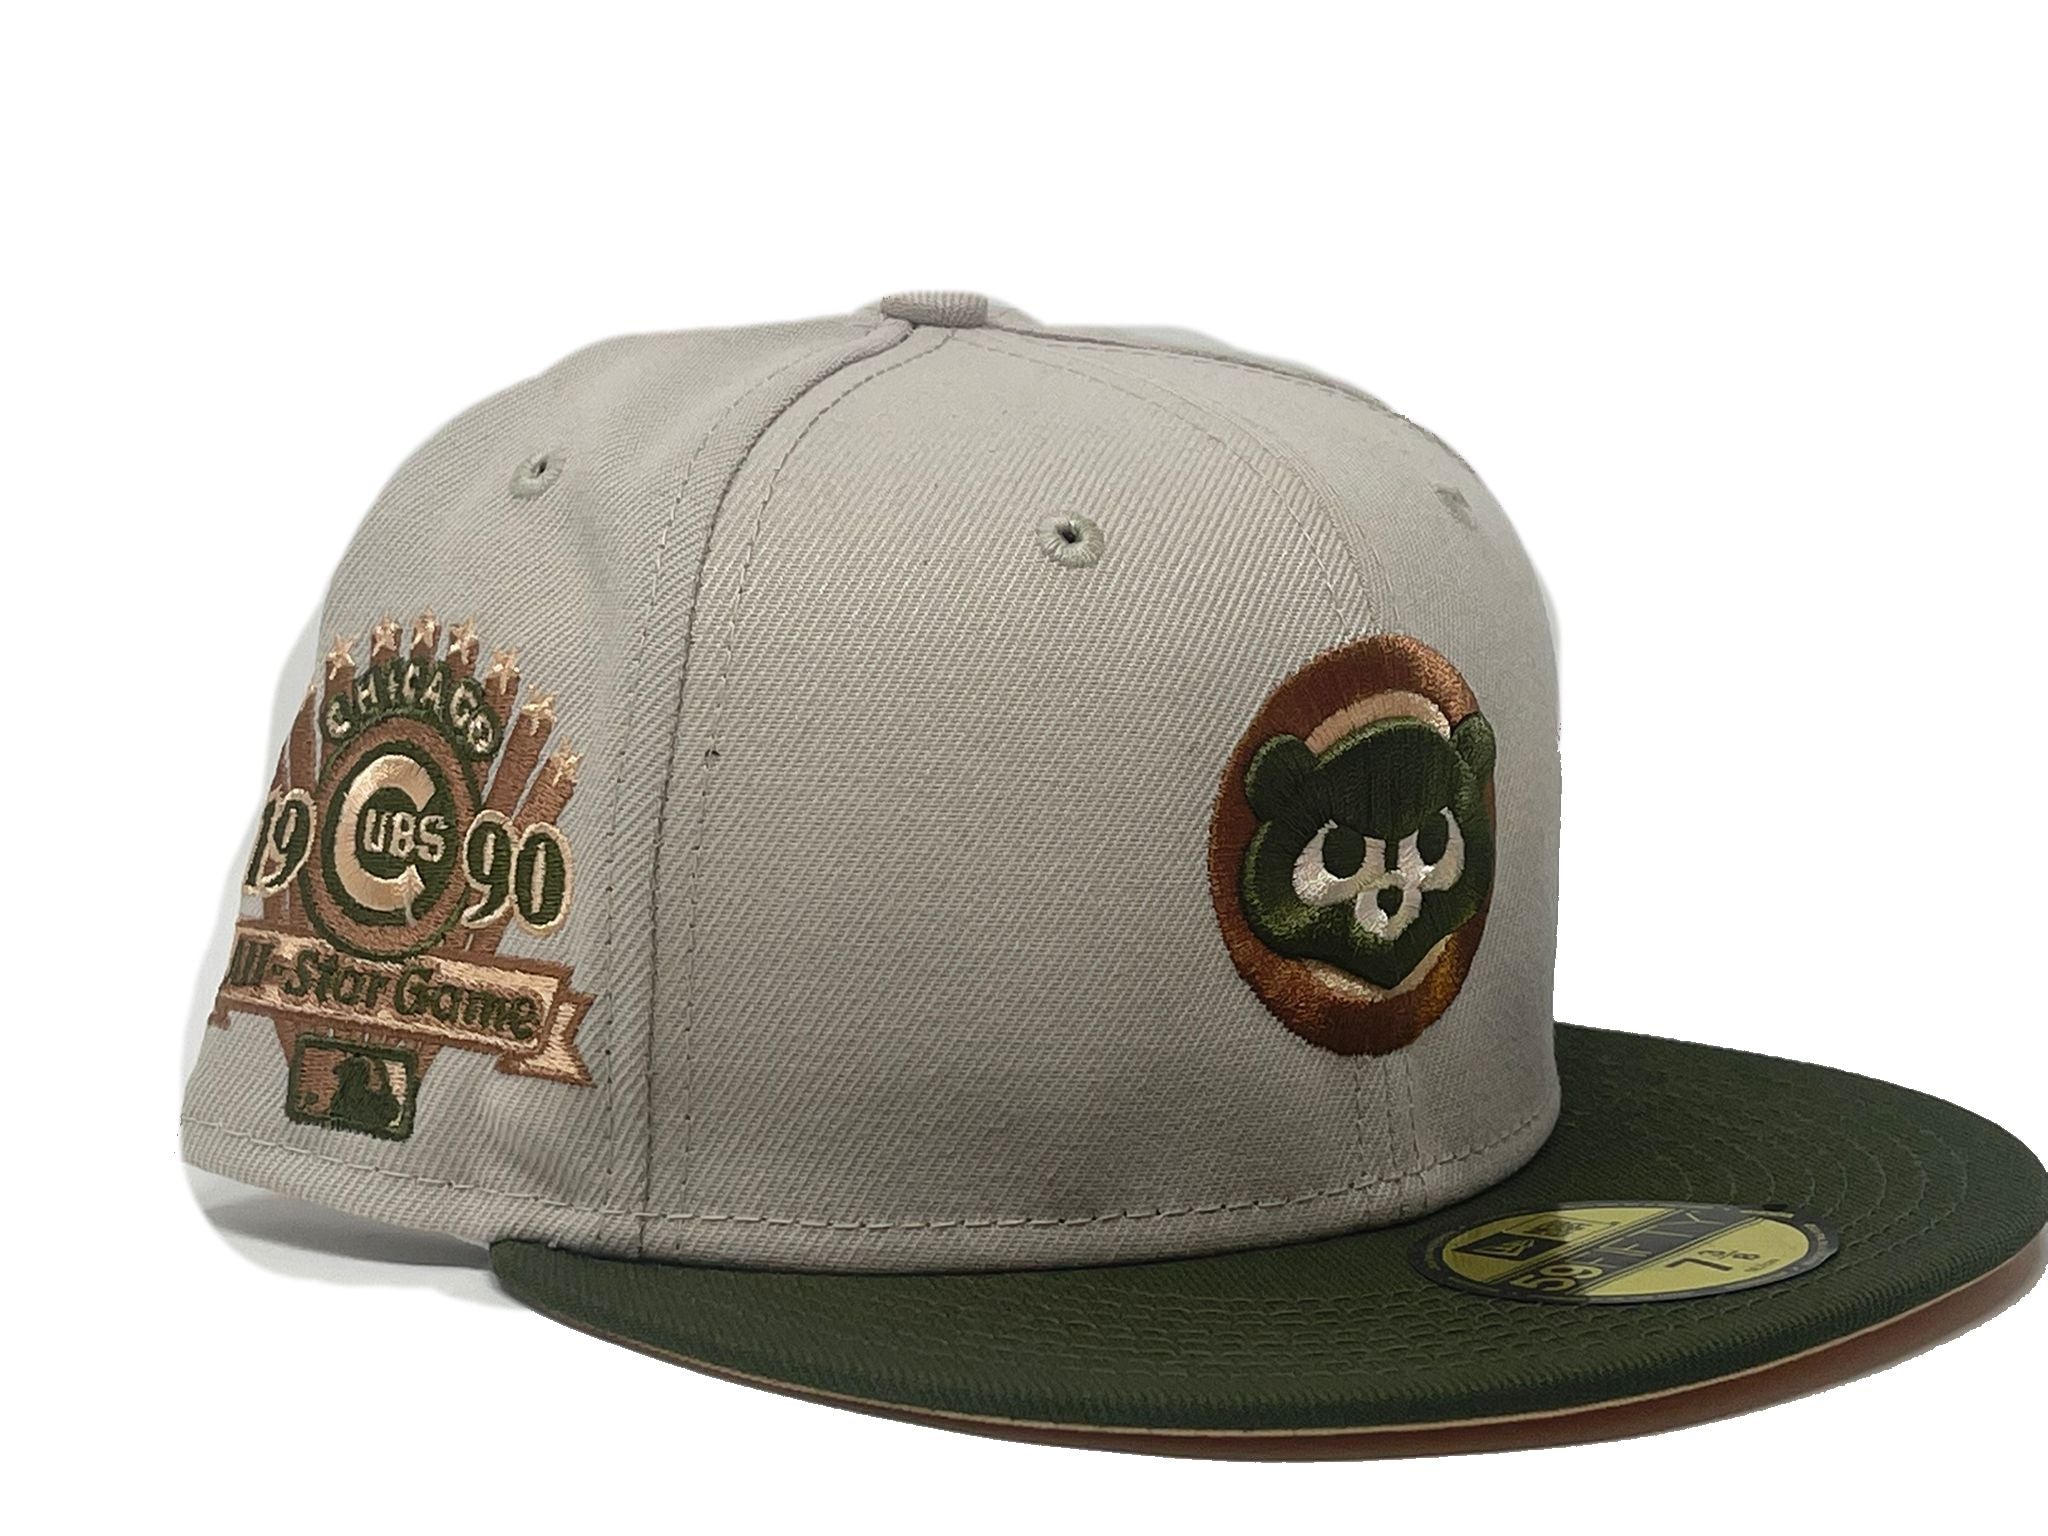 New Era Chicago Cubs All Star Game 1990 Pinstripe Heroes Elite Edition  59Fifty Fitted Hat, EXCLUSIVE HATS, CAPS